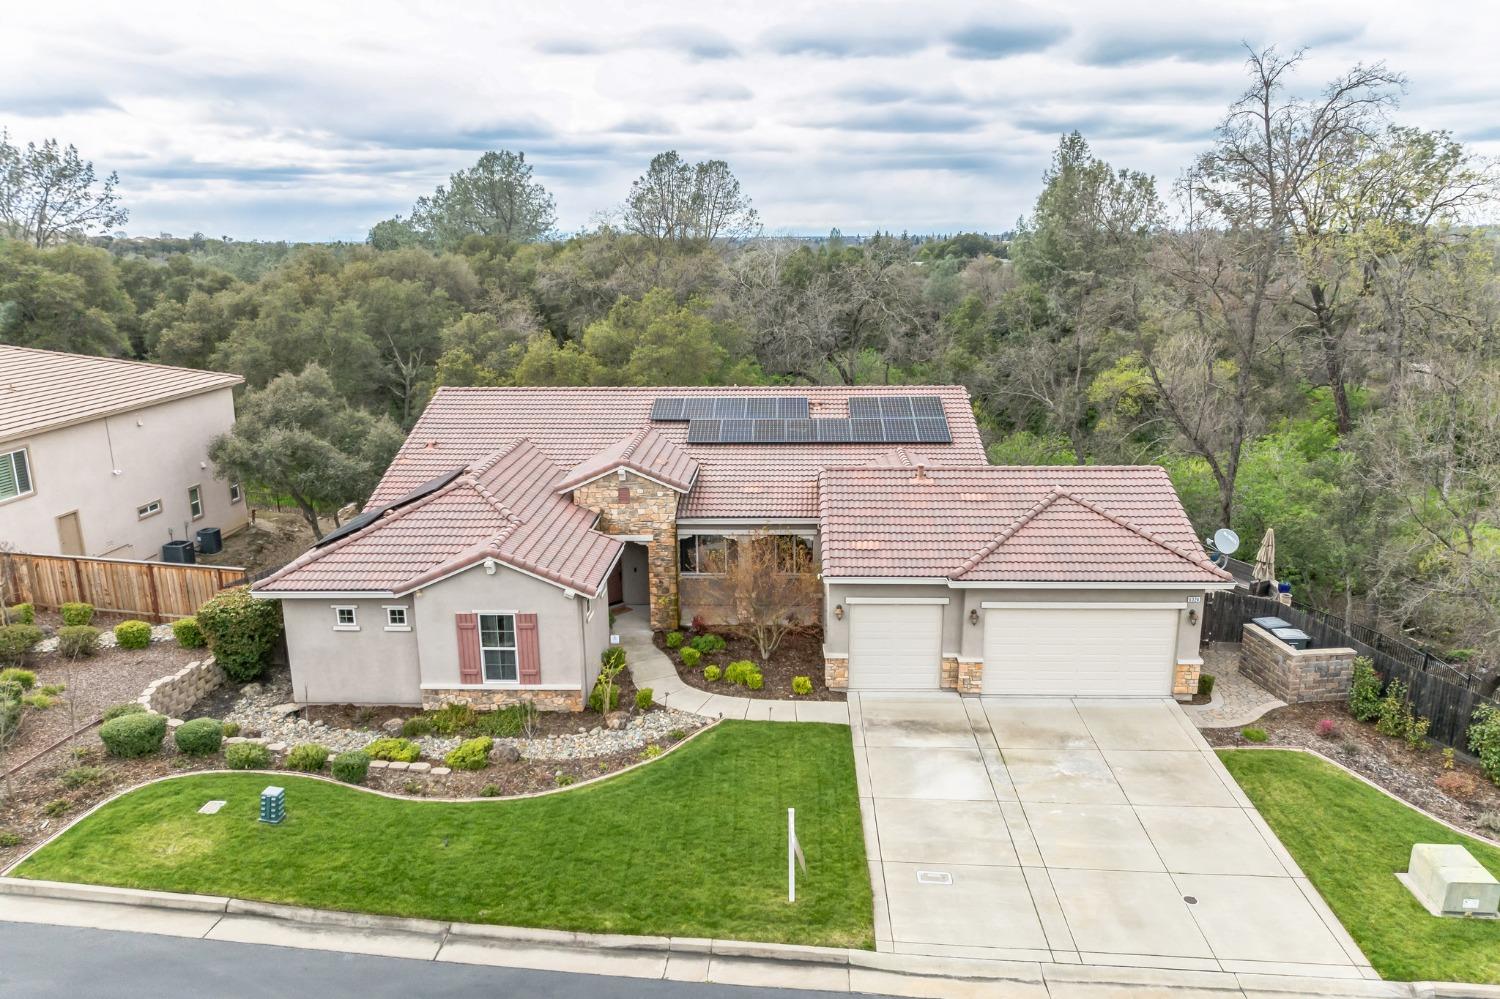 Photo of 6324 Monument Springs Dr in Rocklin, CA